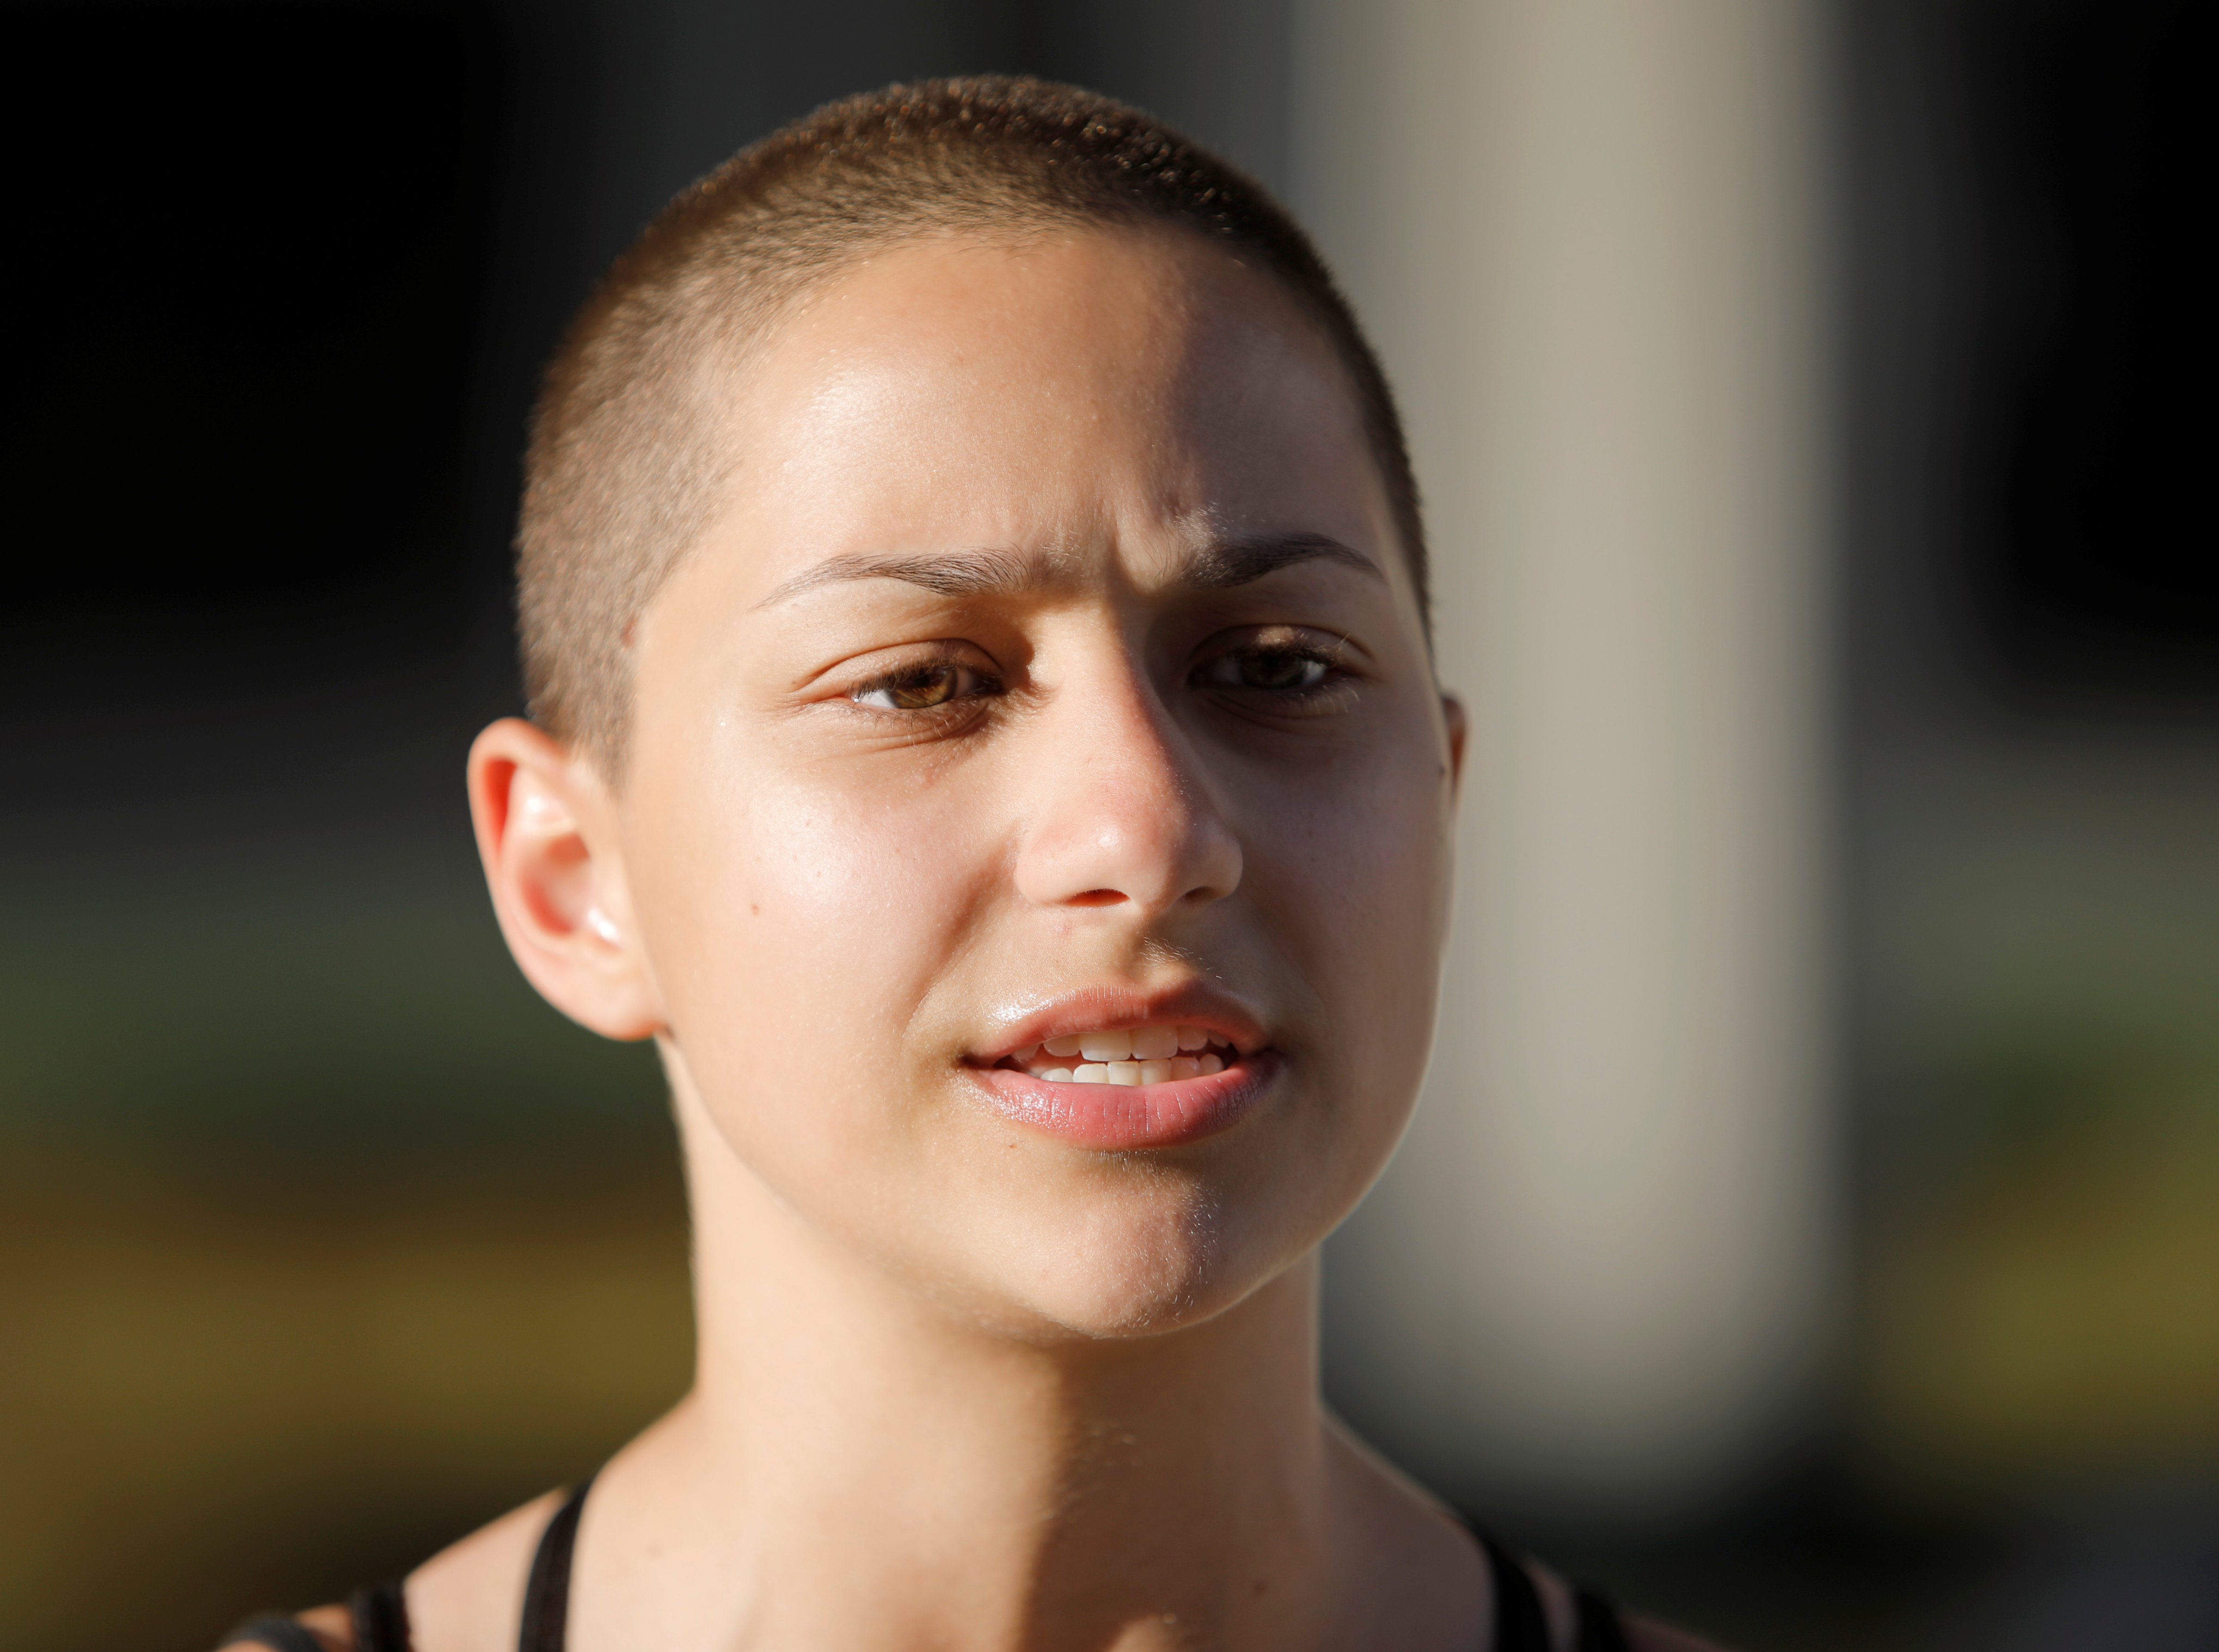 Emma Gonzalez, a senior at Marjory Stoneman Douglas High School, speaks to the media after calling for more gun control at a rally three days after the shooting at her school, in Fort Lauderdale